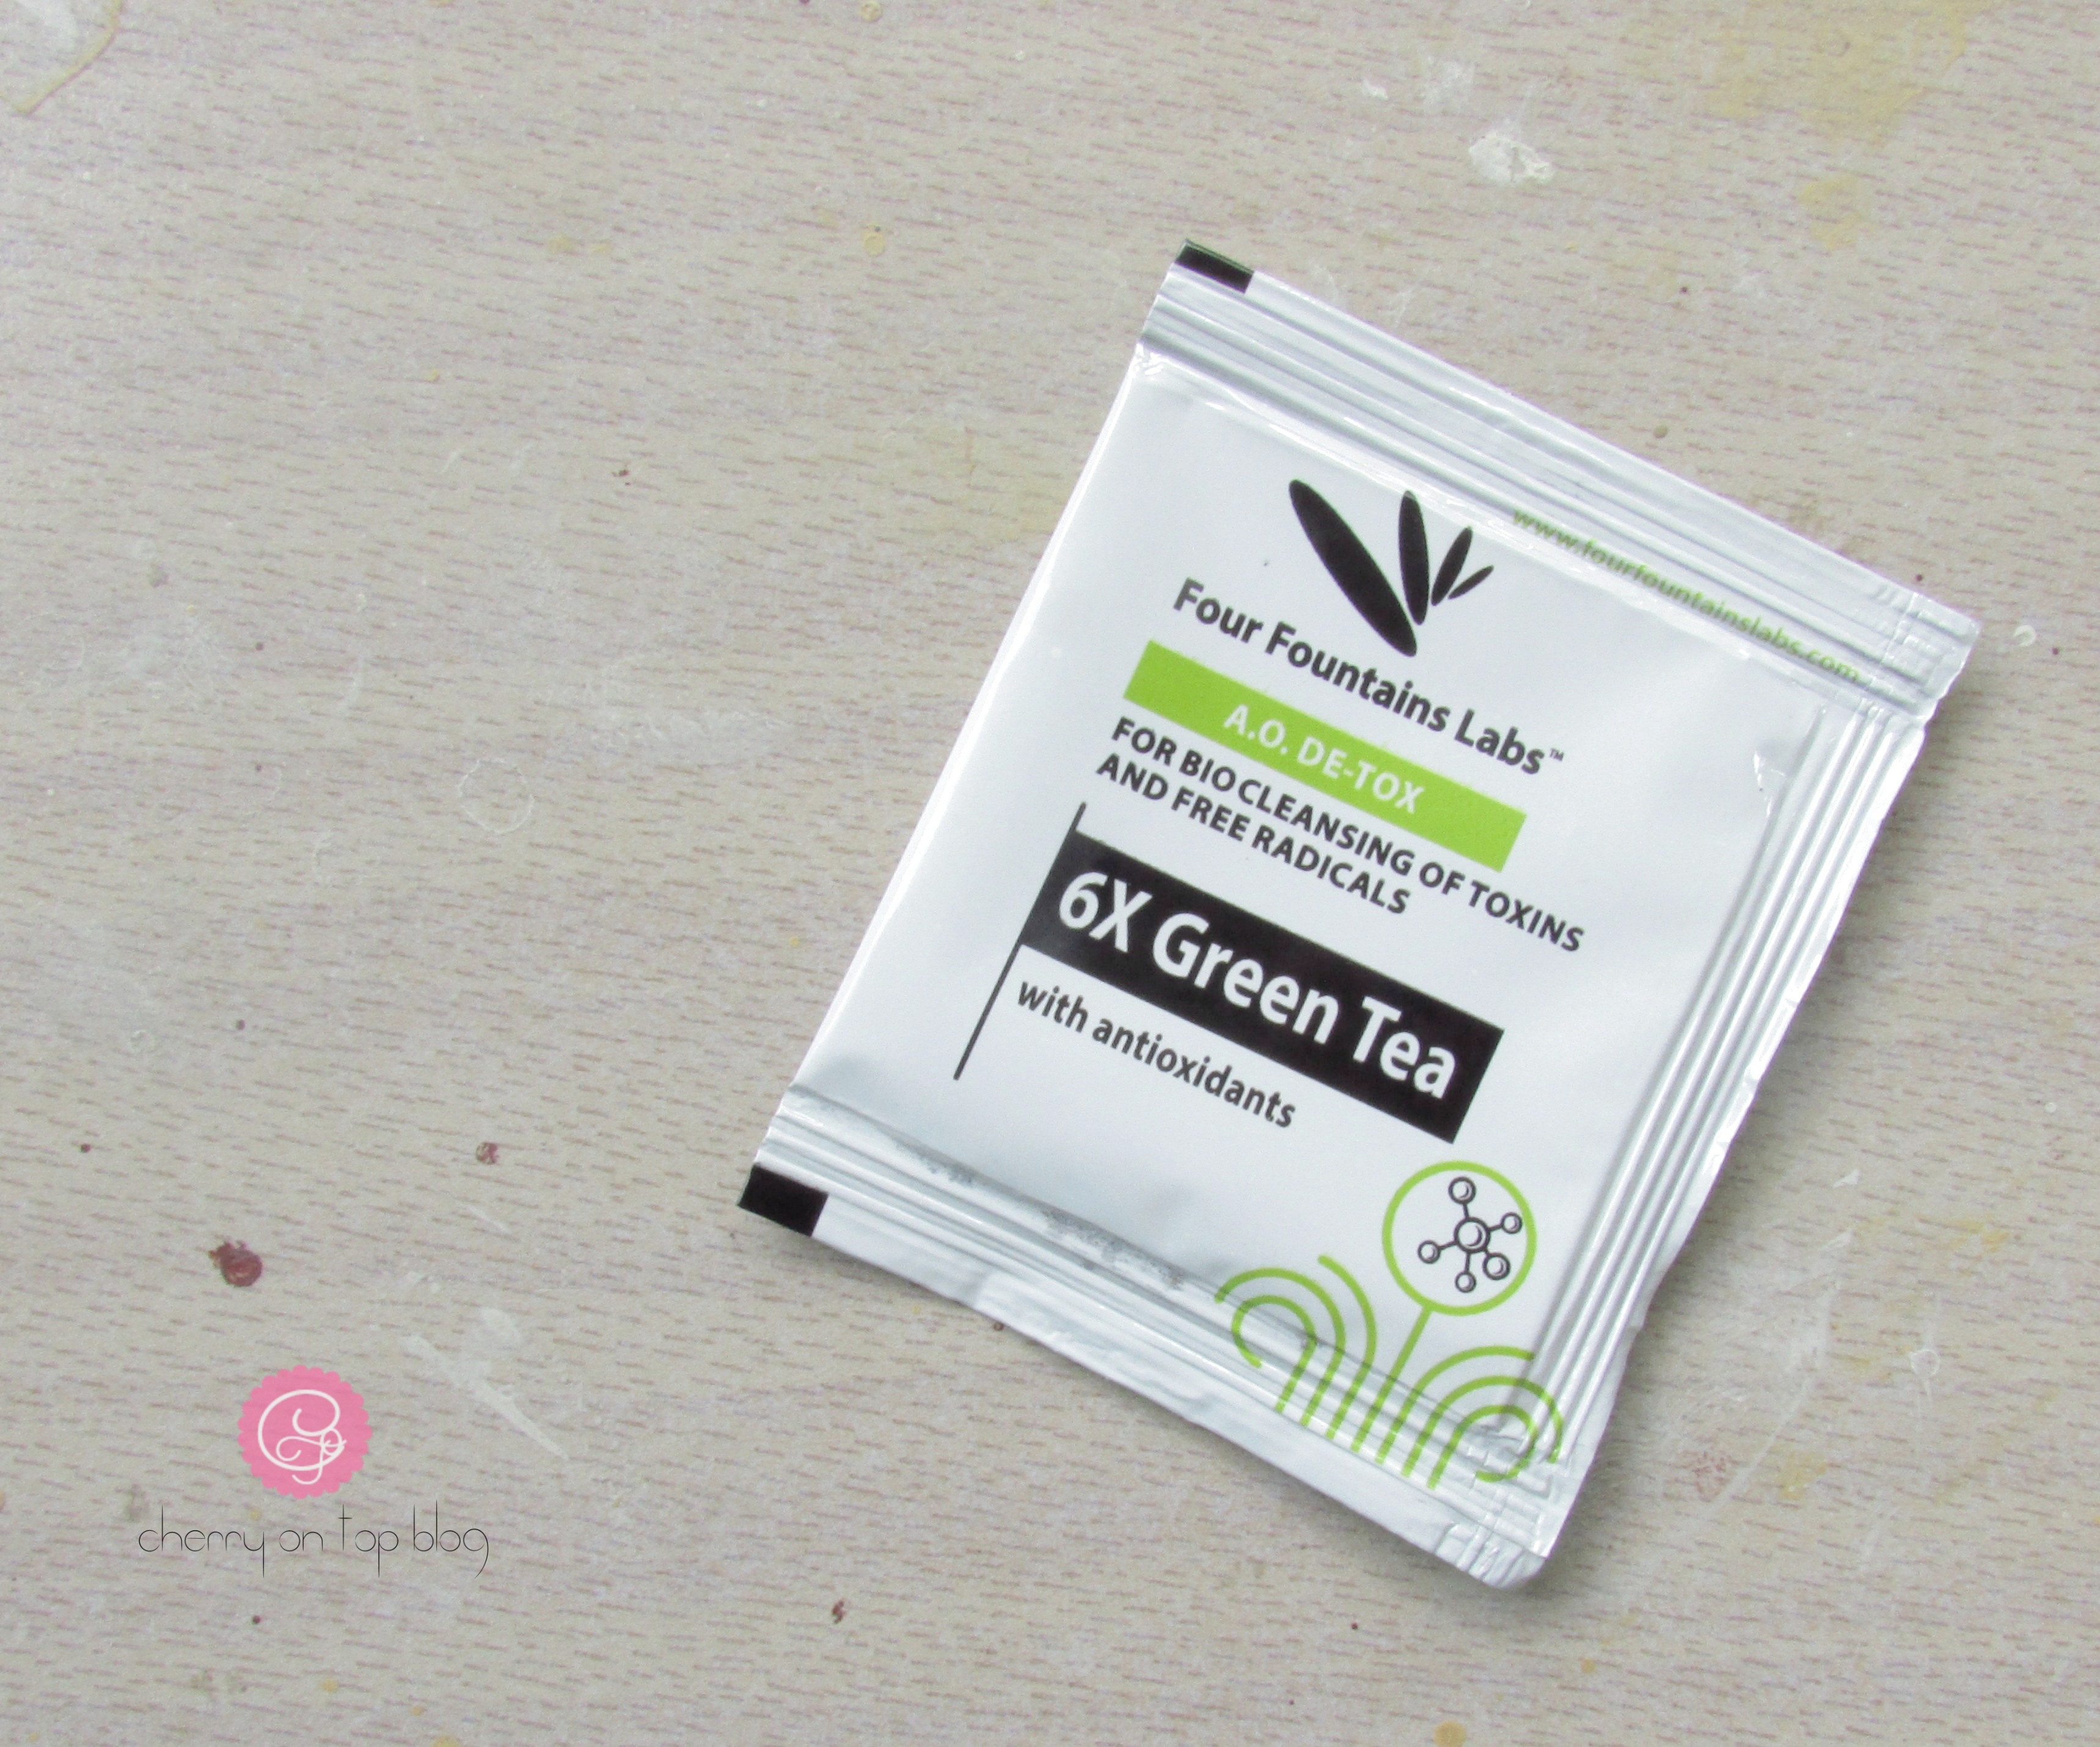 Four Fountains Labs 6X Green Tea Review| Cherry On Top Blog